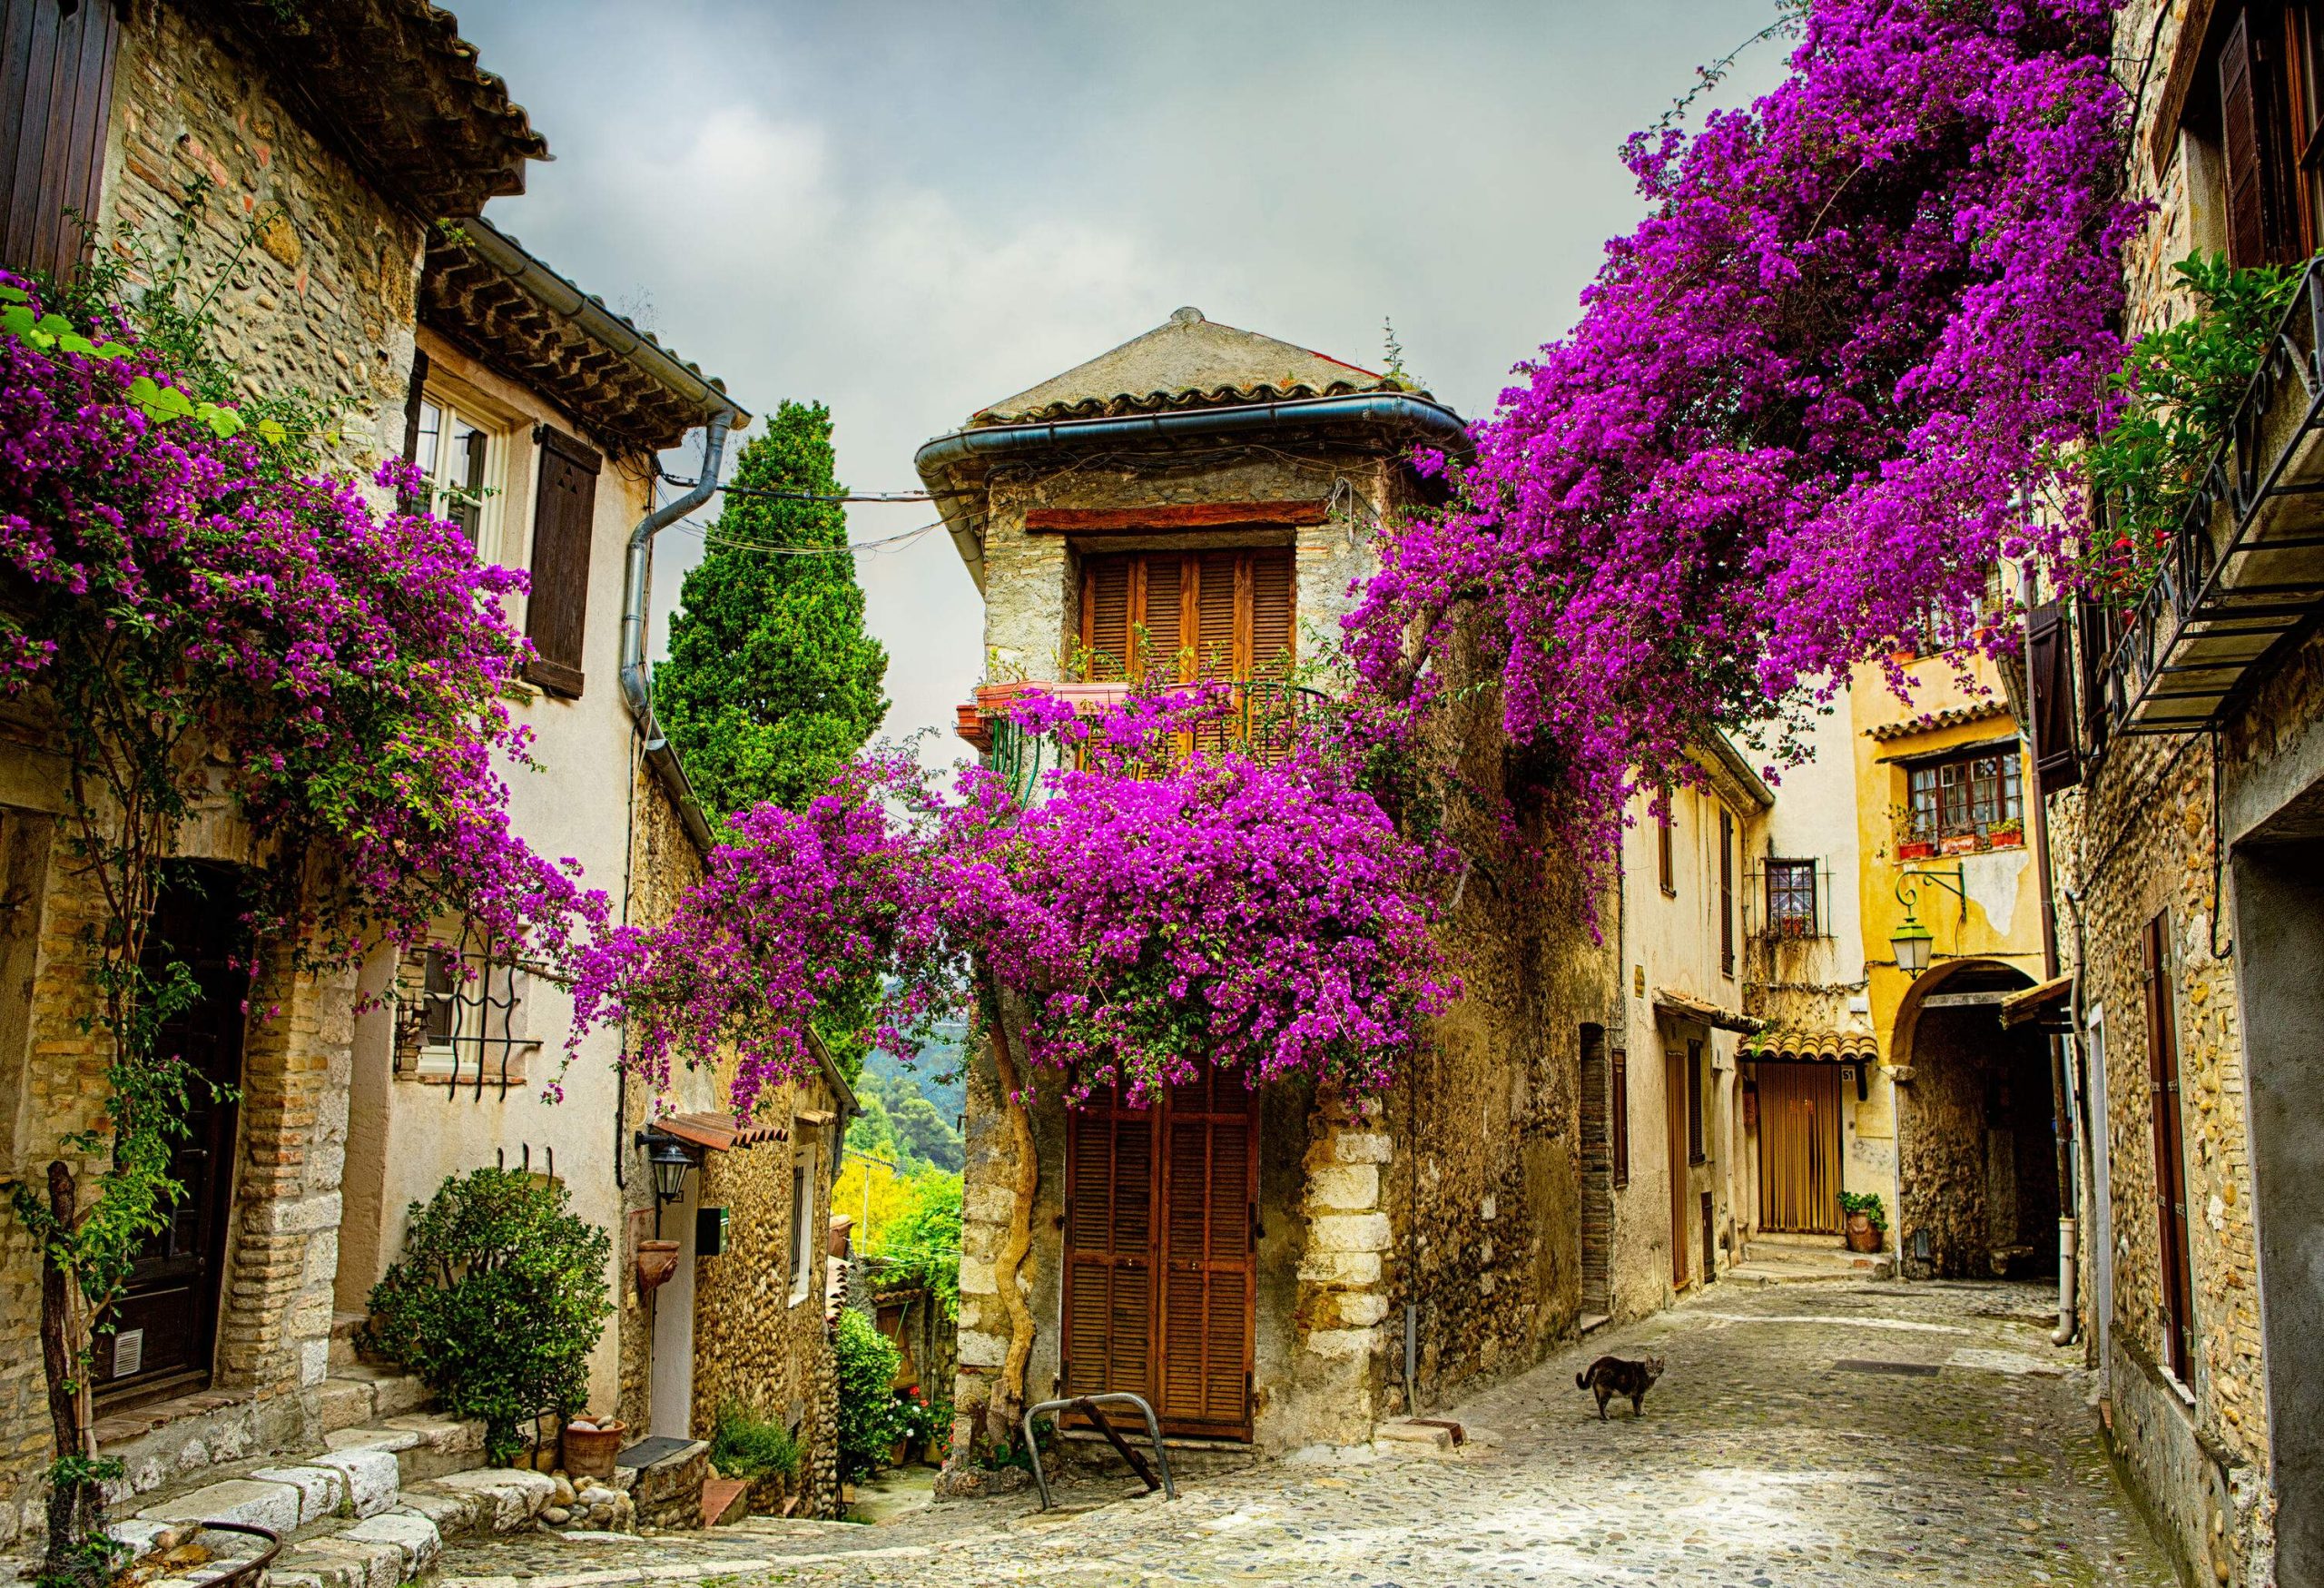 A cobblestone street lined with old stone houses covered with vibrant purple bougainvillea plants.